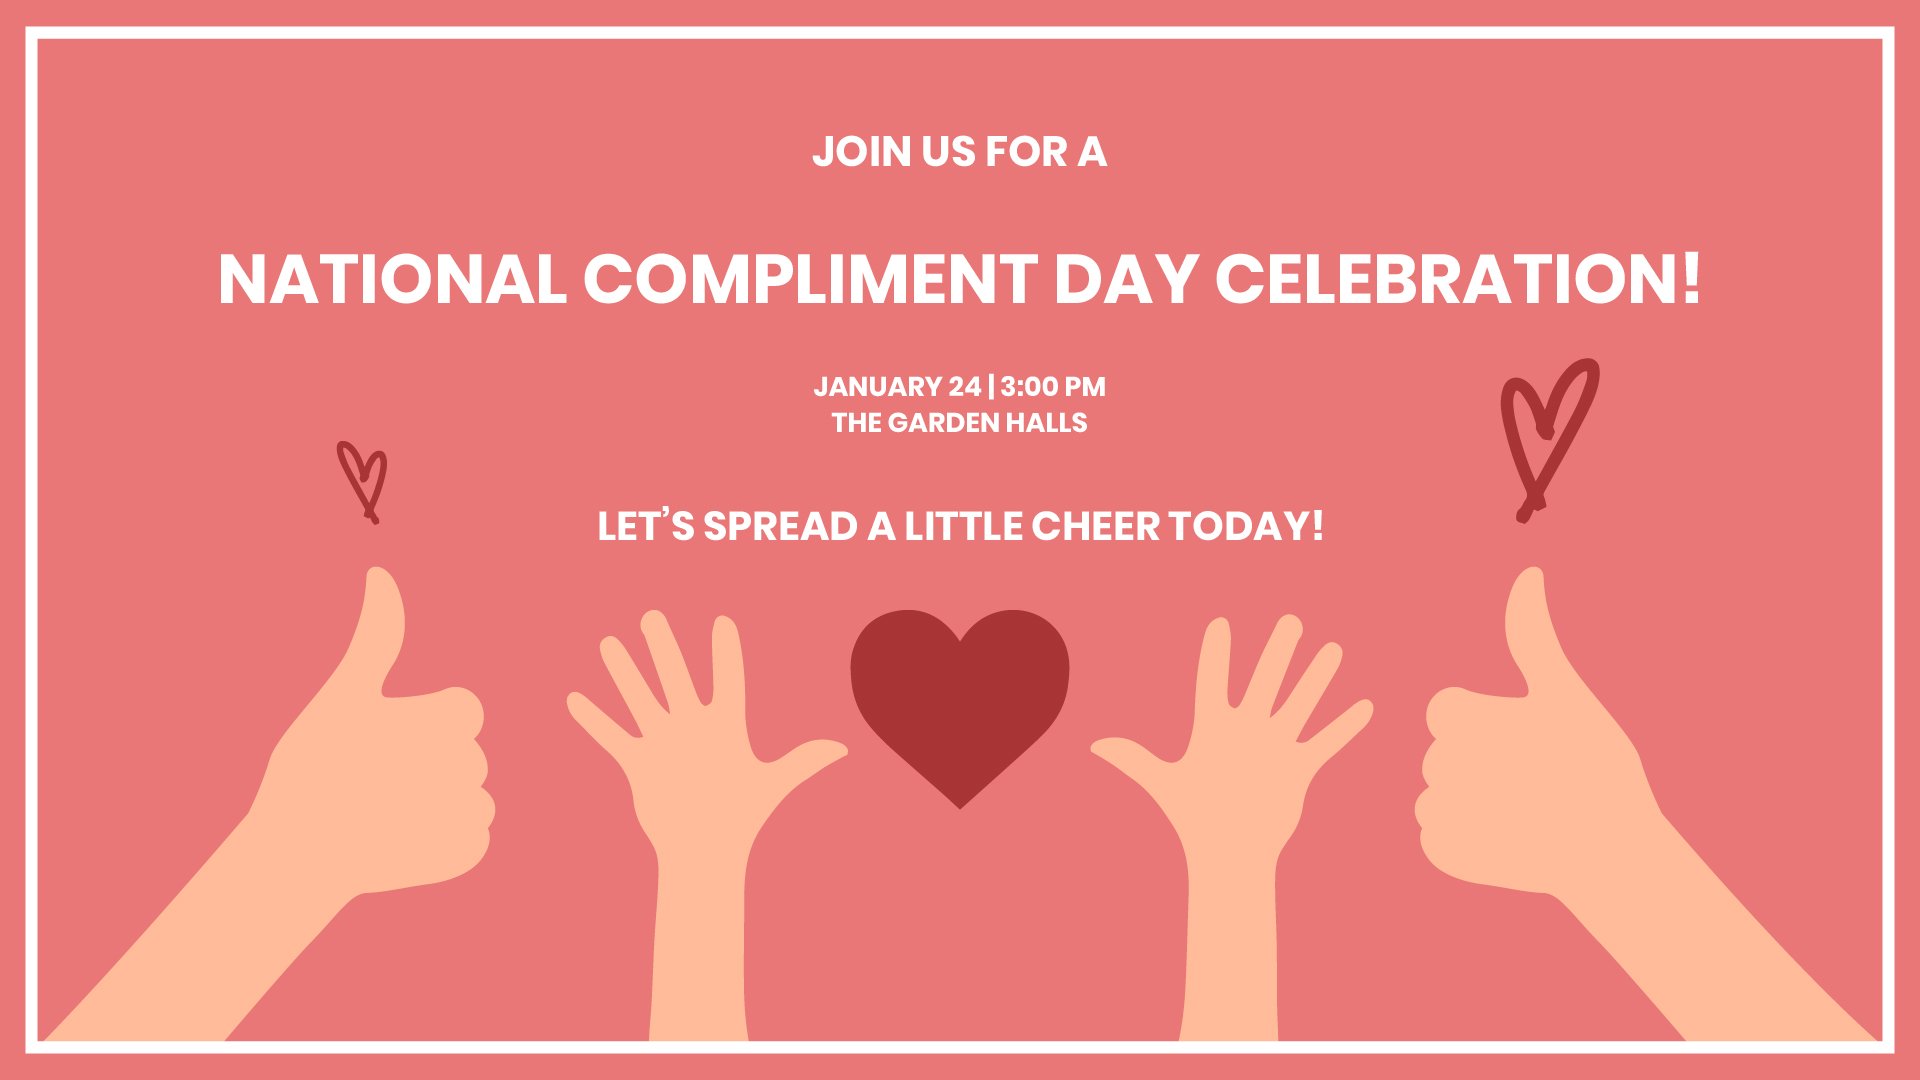 National Compliment Day Invitation Background